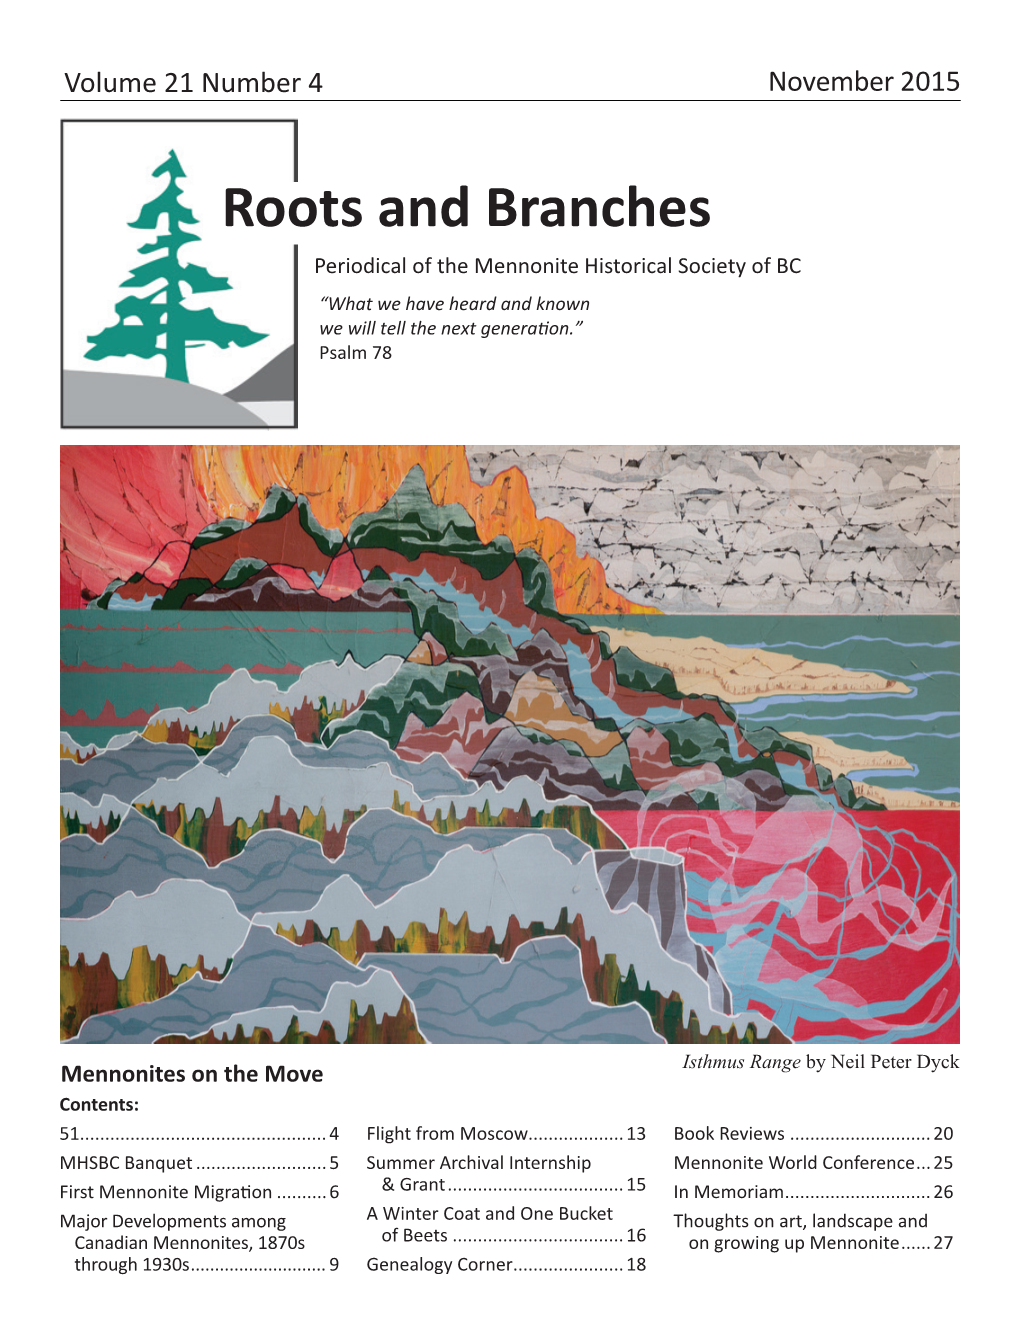 Roots and Branches Periodical of the Mennonite Historical Society of BC “What We Have Heard and Known We Will Tell the Next Genera On.” Psalm 78